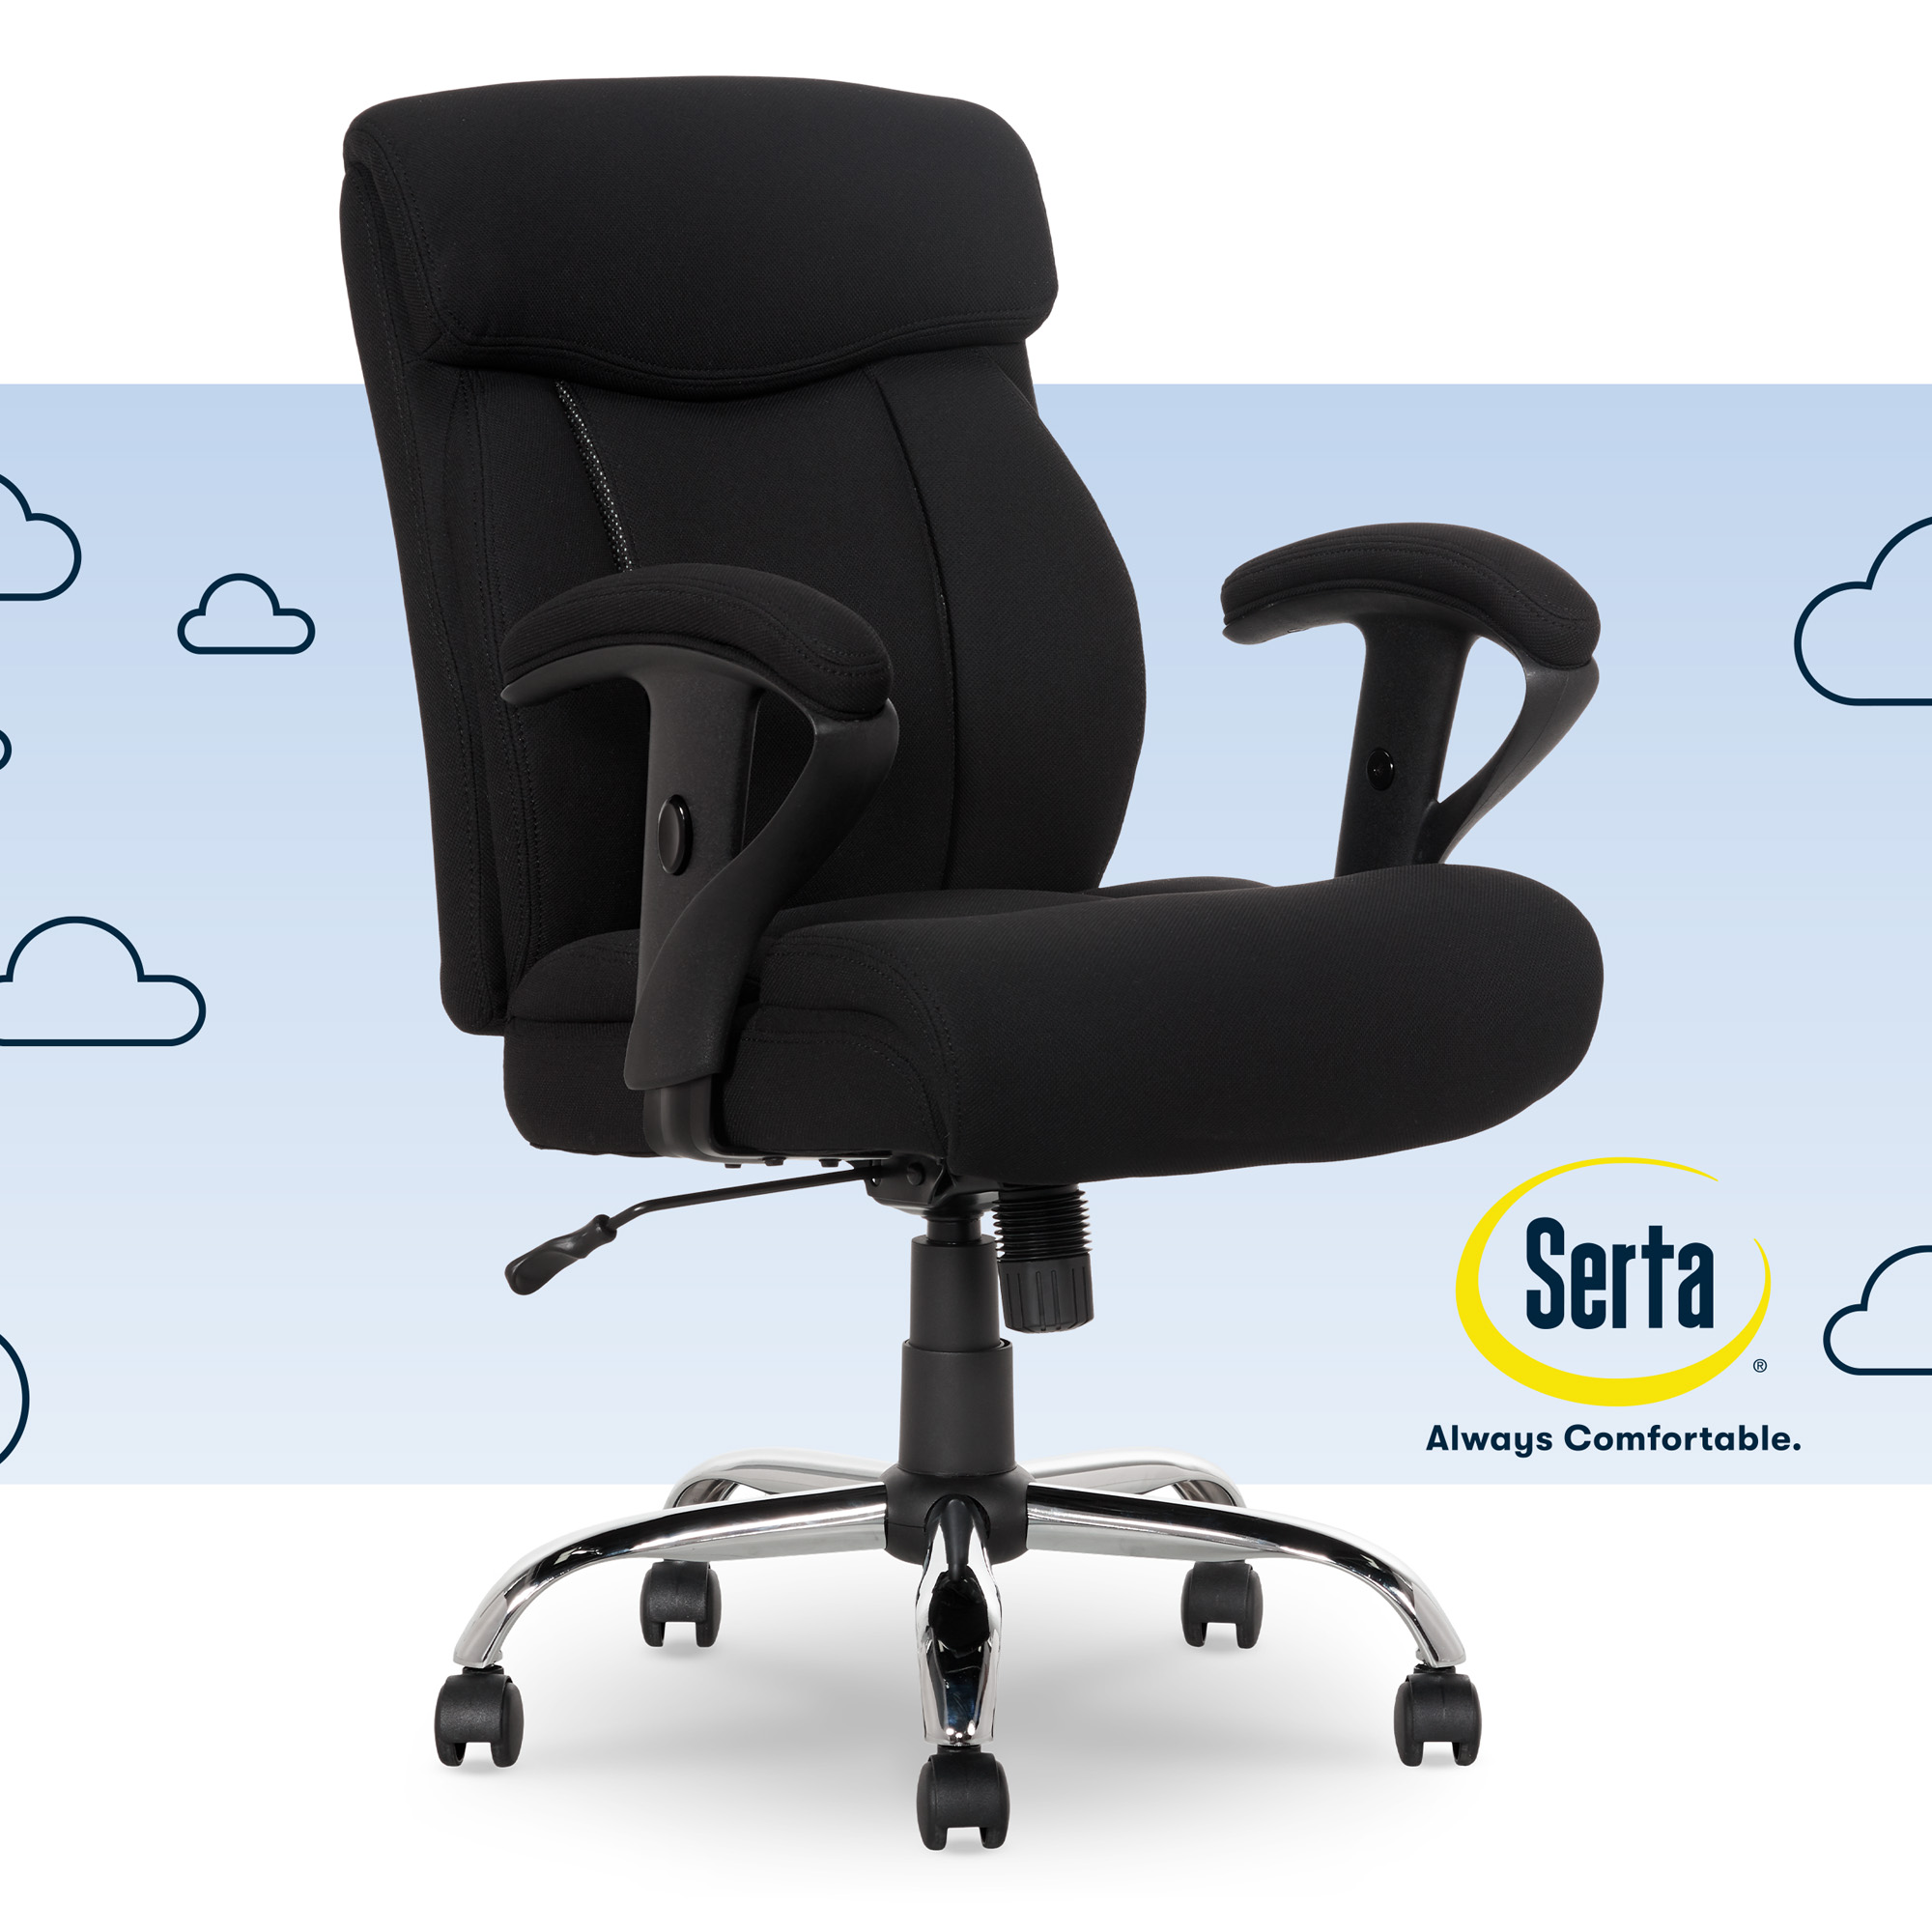 Serta Big & Tall Fabric Manager Office Chair, Supports up to 300 lbs, Black - image 1 of 15